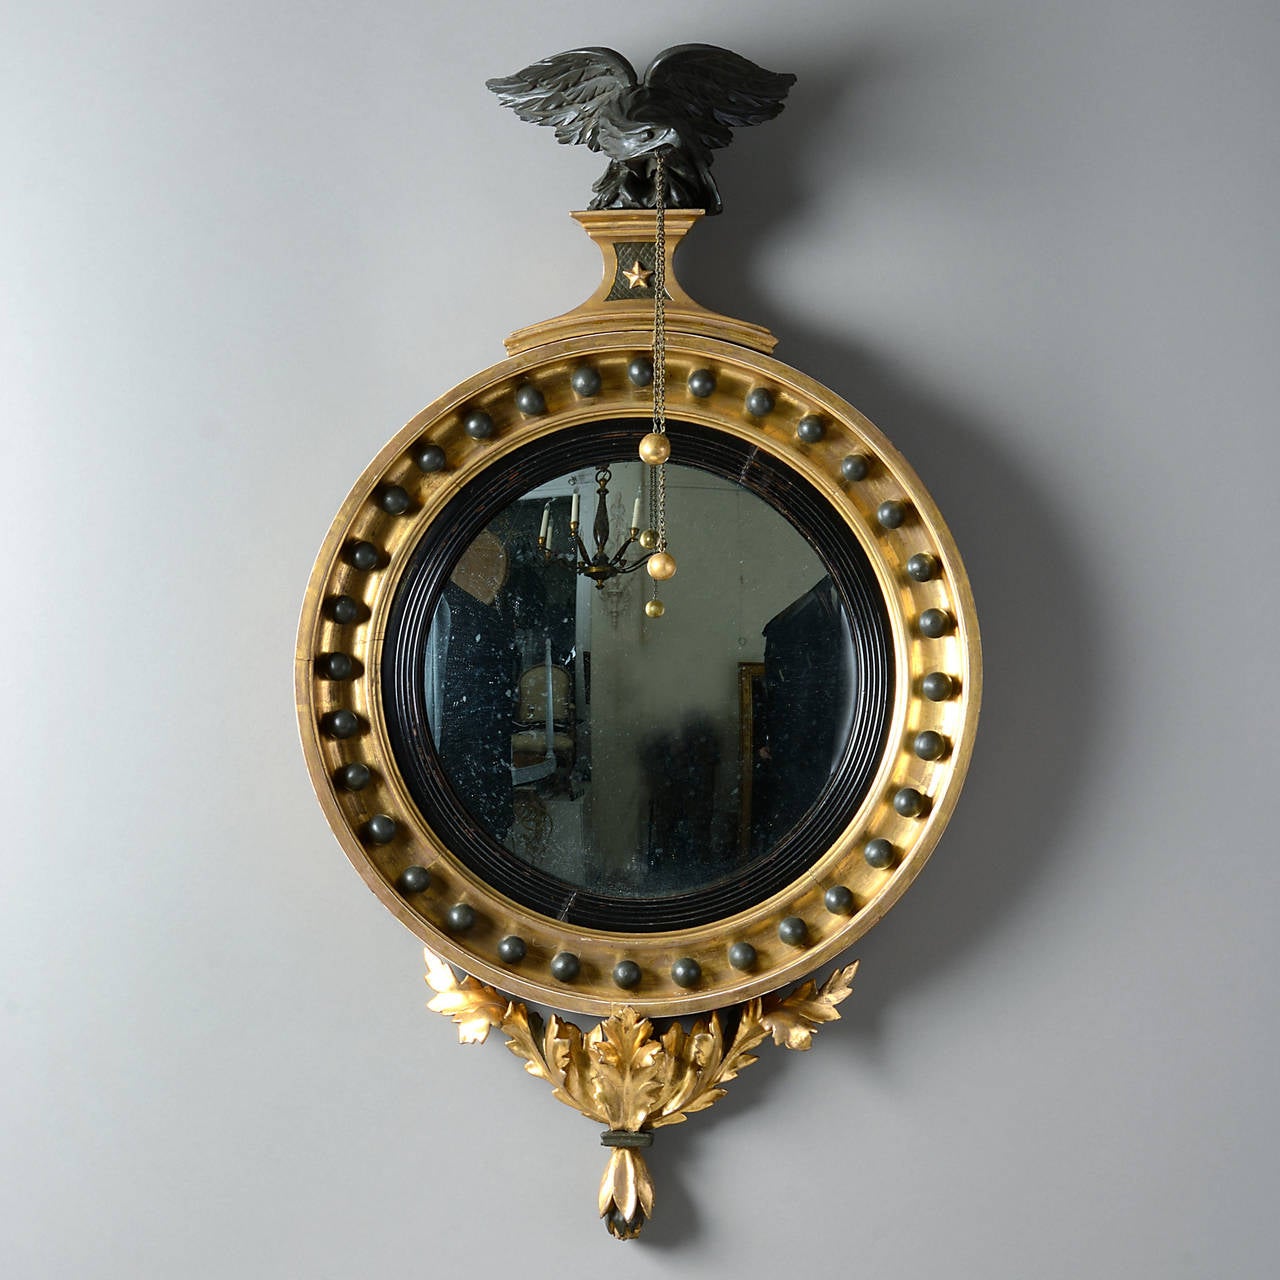 A fine regency Period convex mirror, the circular plate set within a reeded slip, the giltwood frame encrusted with ebonised balls and surmounted with an ebonised eagle clutching balls and chains from its beak, the whole terminating in carved